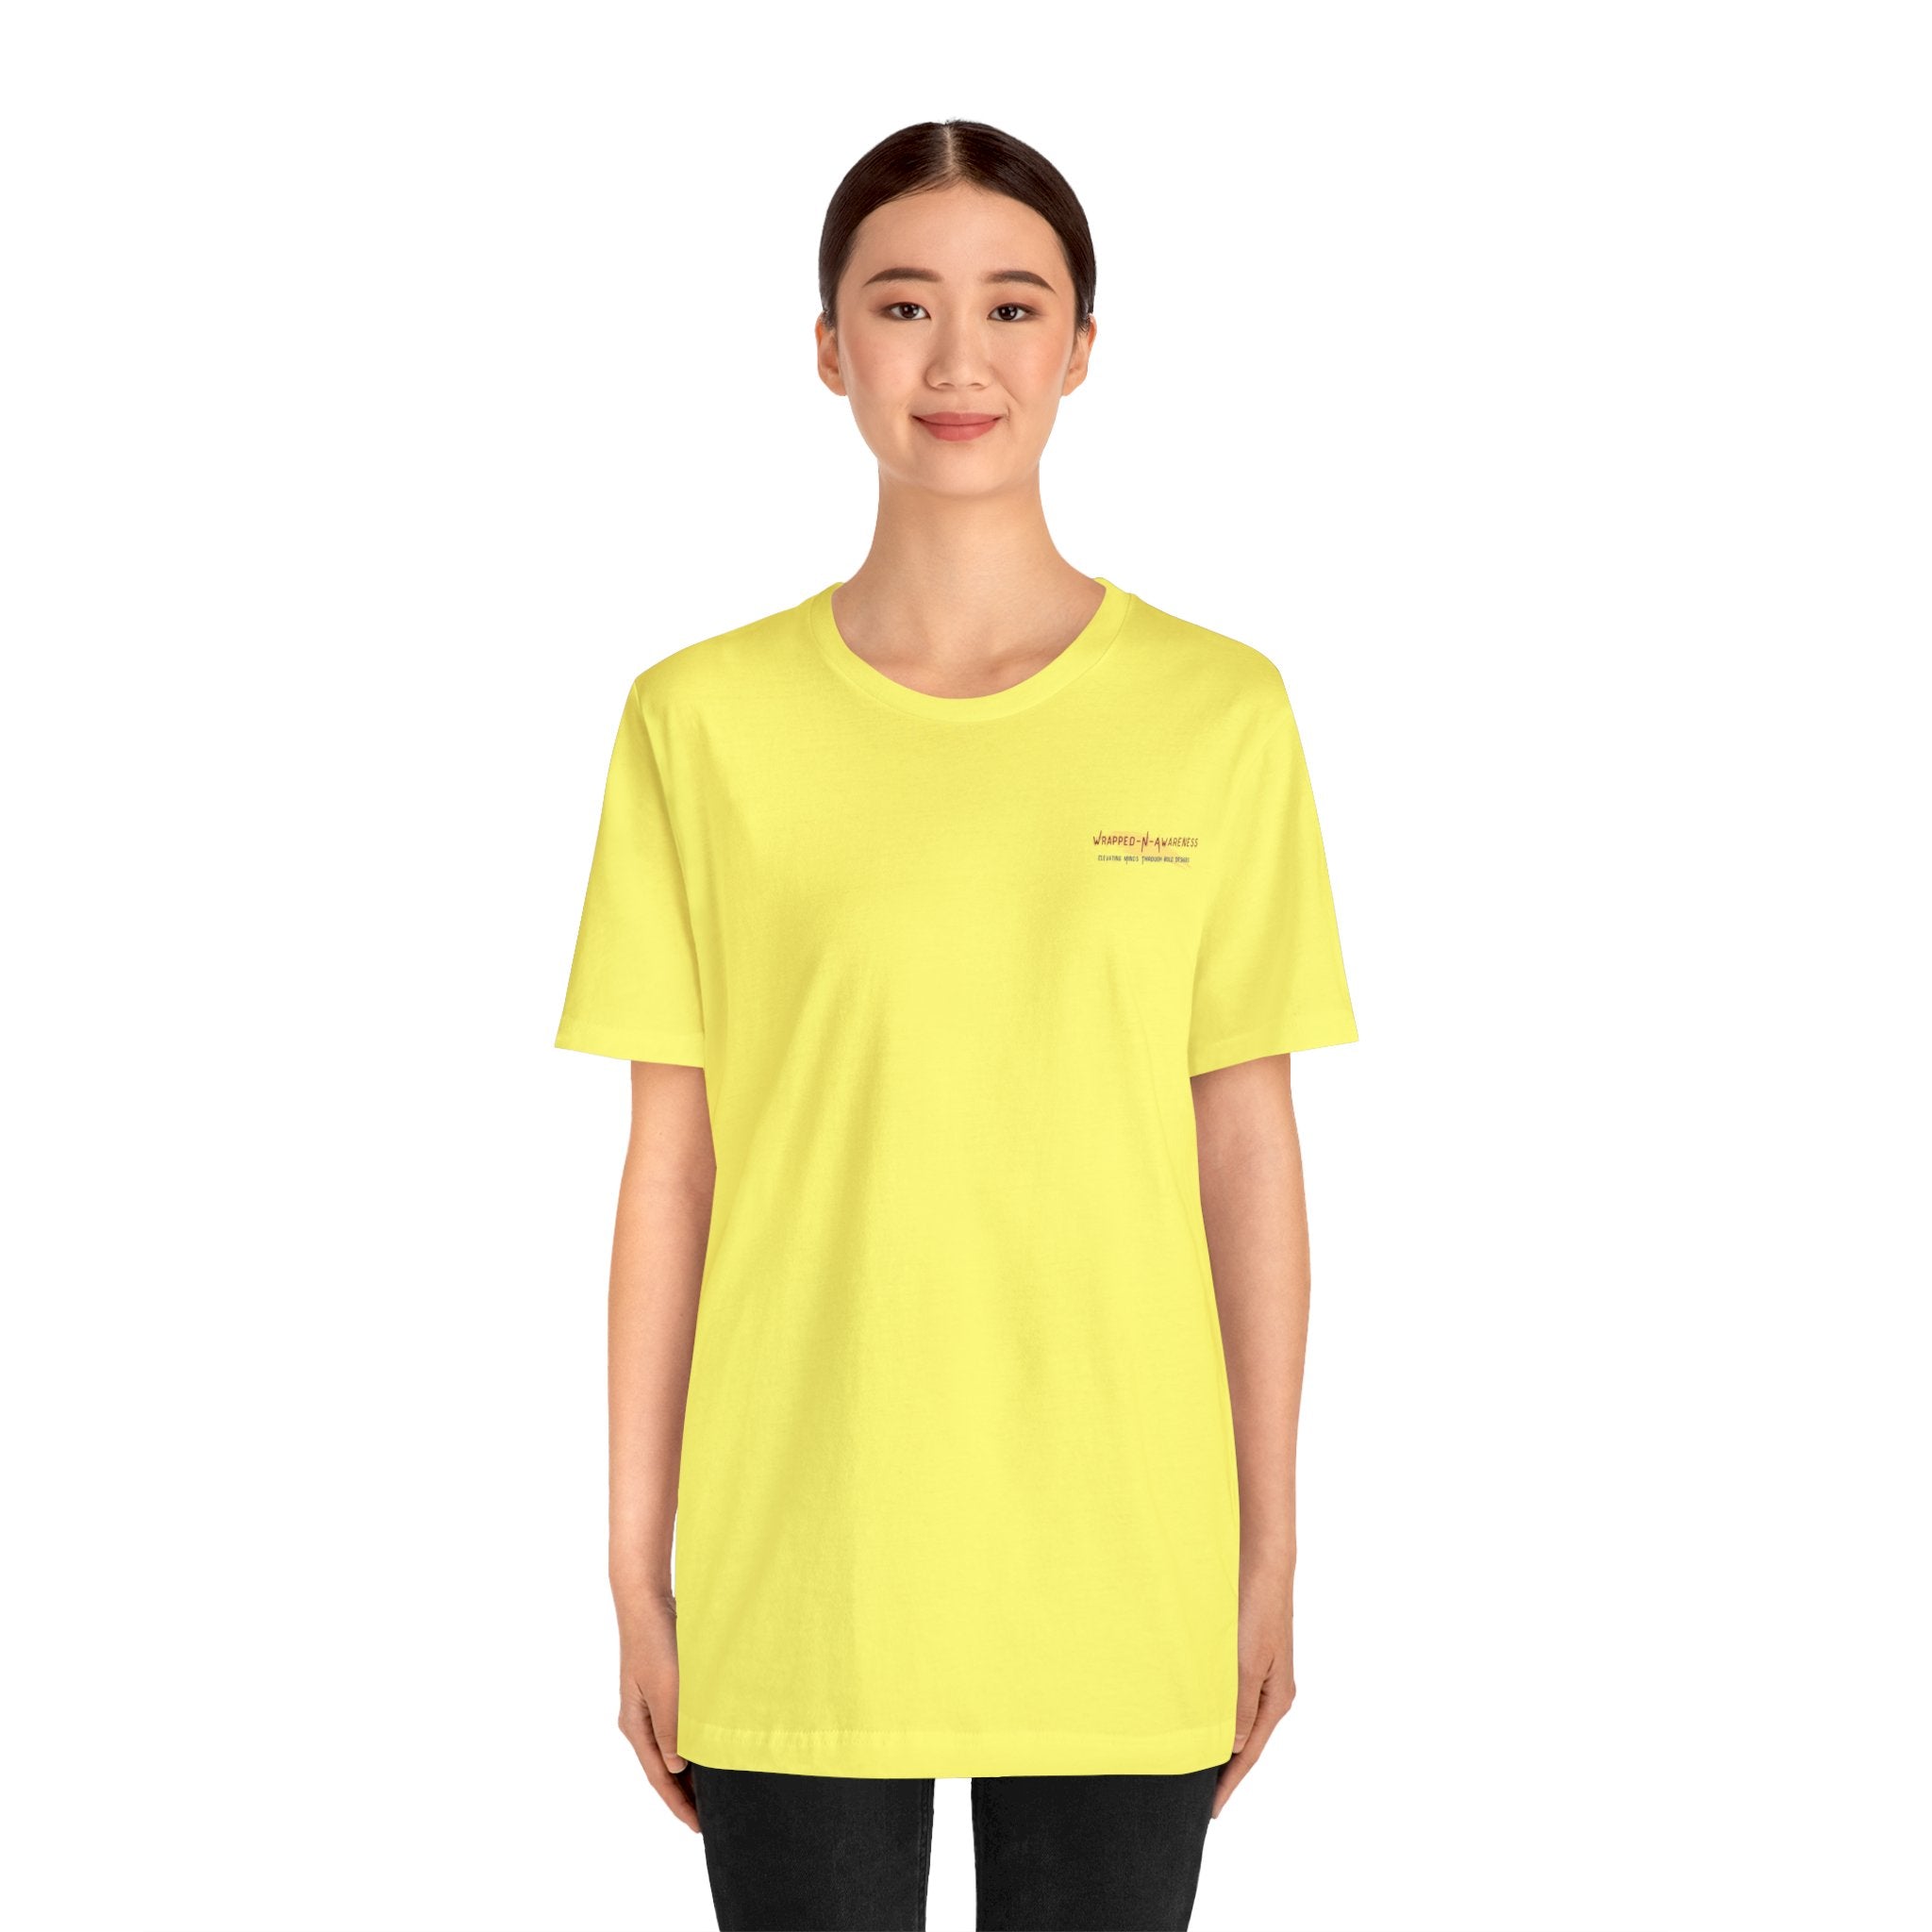 Progress Over Perfection Tee - Bella+Canvas 3001 Yellow Airlume Cotton Bella+Canvas 3001 Crew Neckline Jersey Short Sleeve Lightweight Fabric Mental Health Support Retail Fit Tear-away Label Tee Unisex Tee T-Shirt 4326914603536239149_2048 Printify